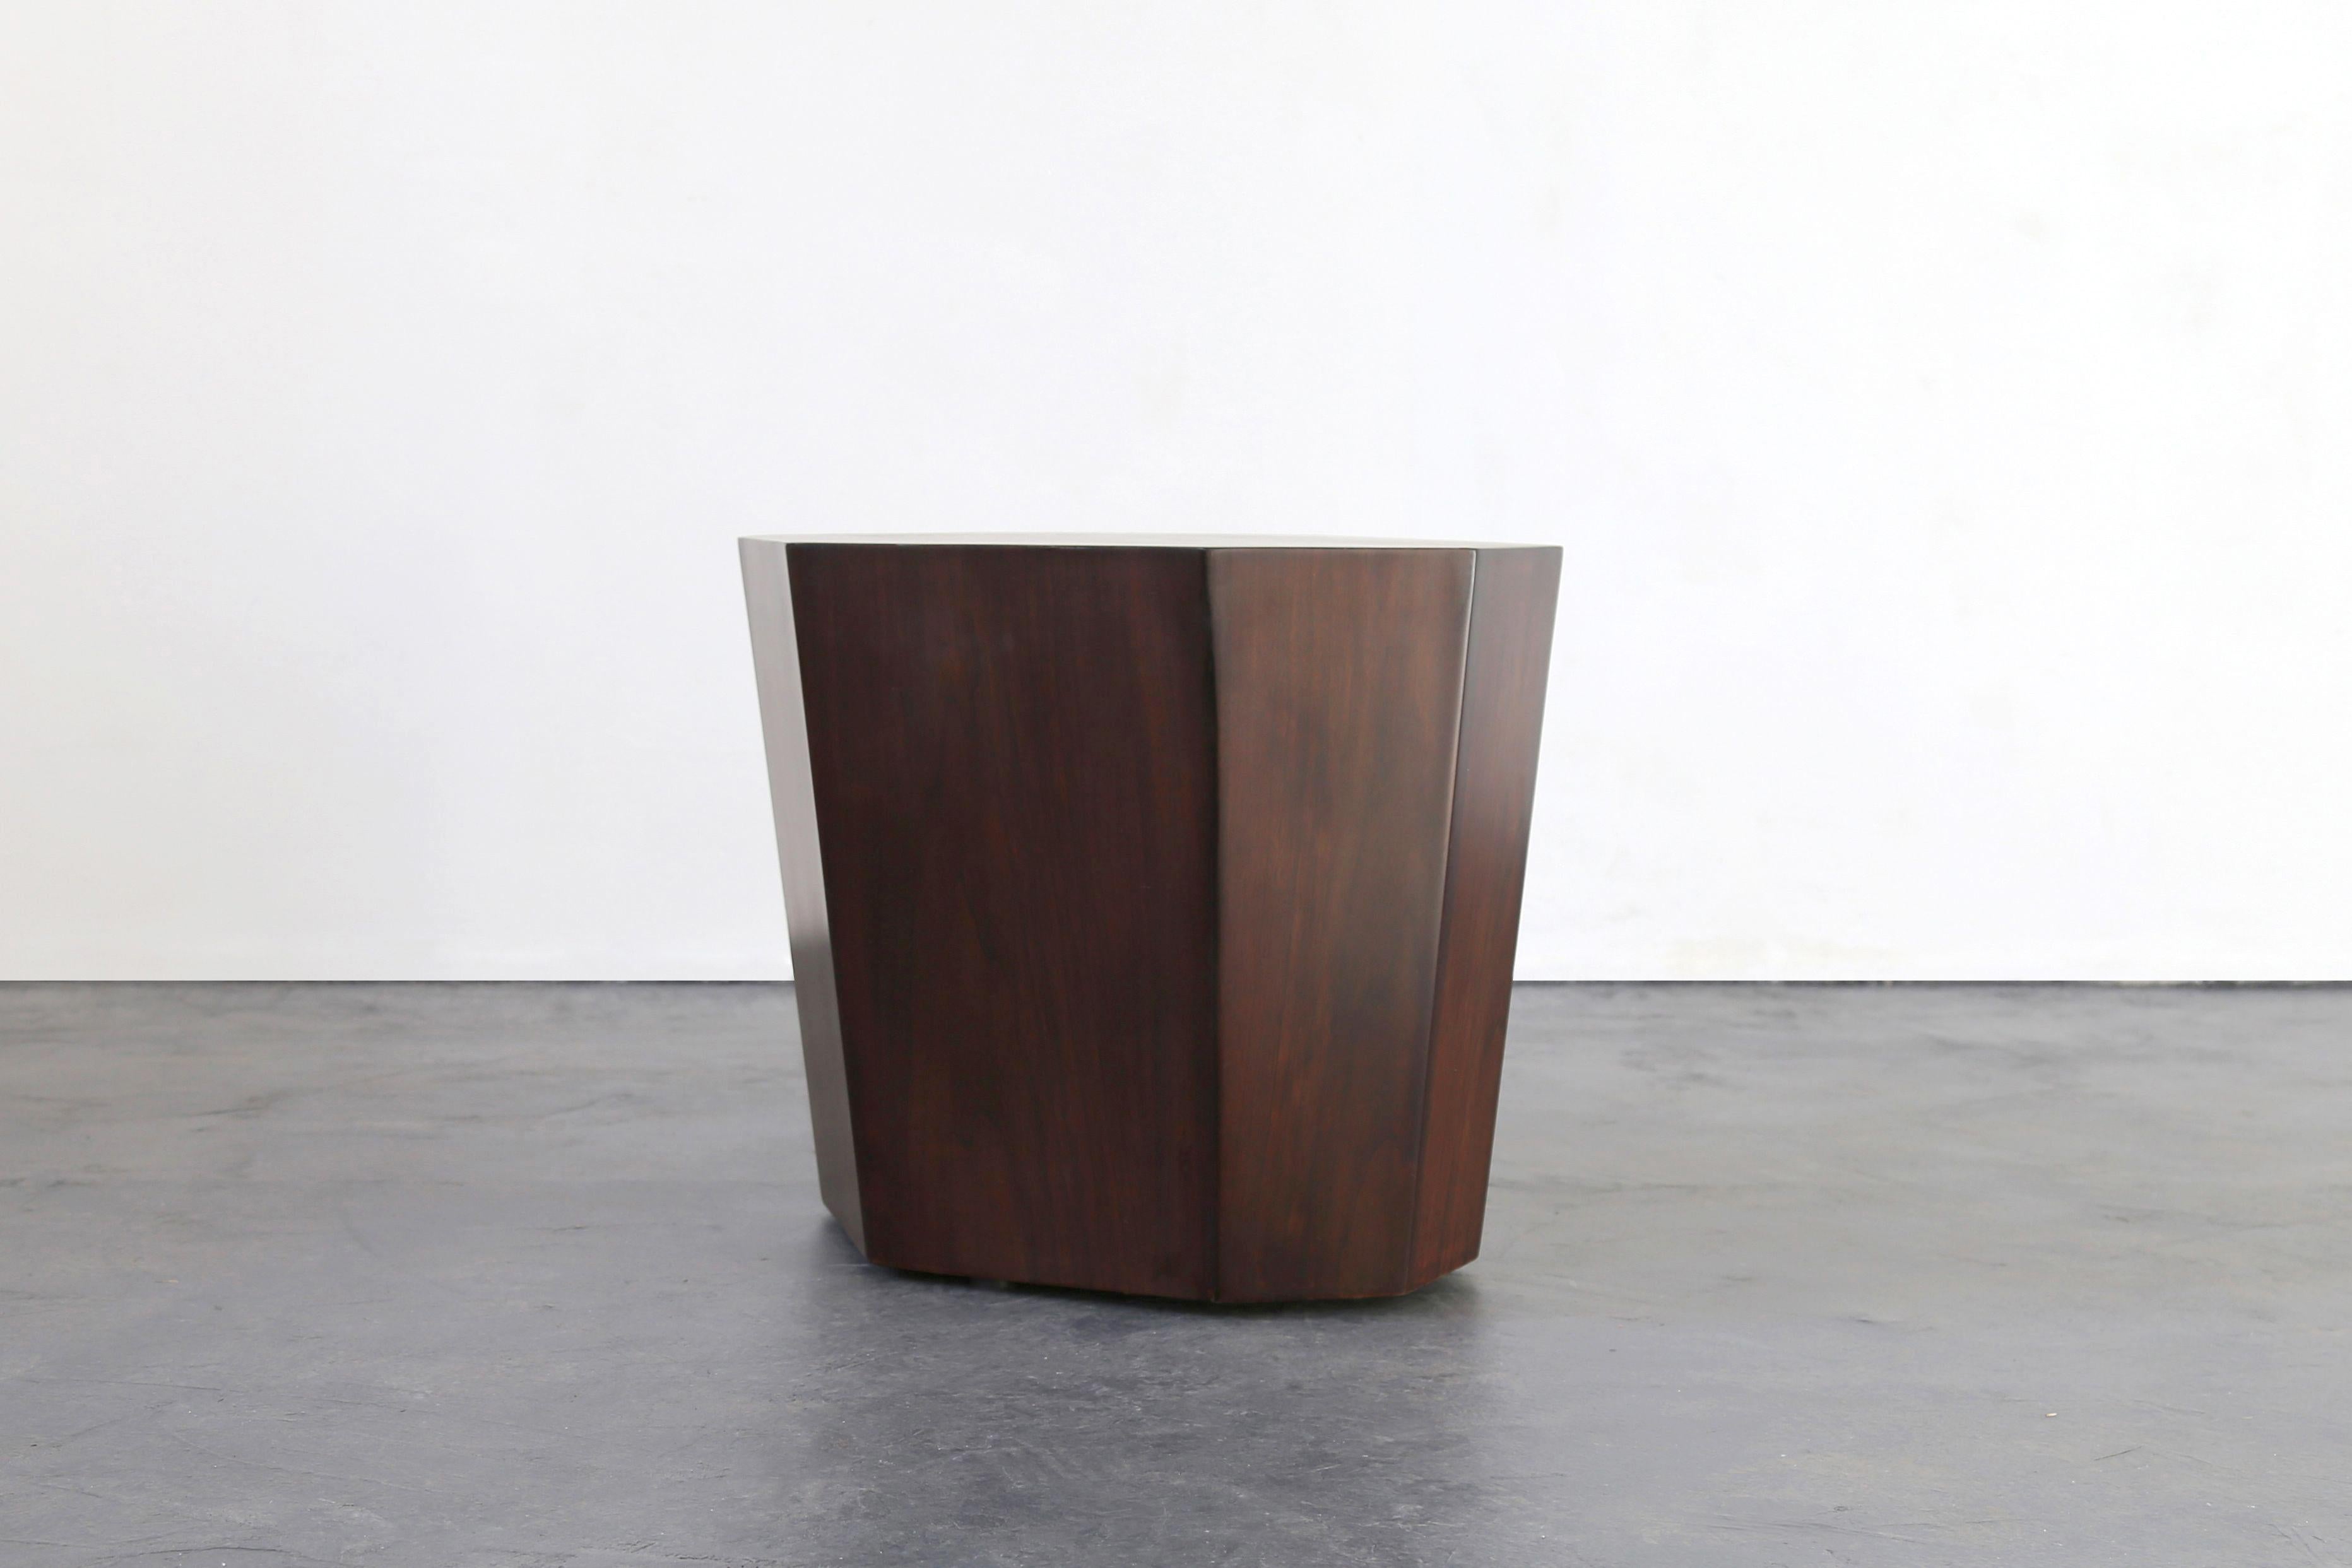 Woodwork Geometric Occasional Table in Argentine Rosewood from Costantini, Clariss For Sale